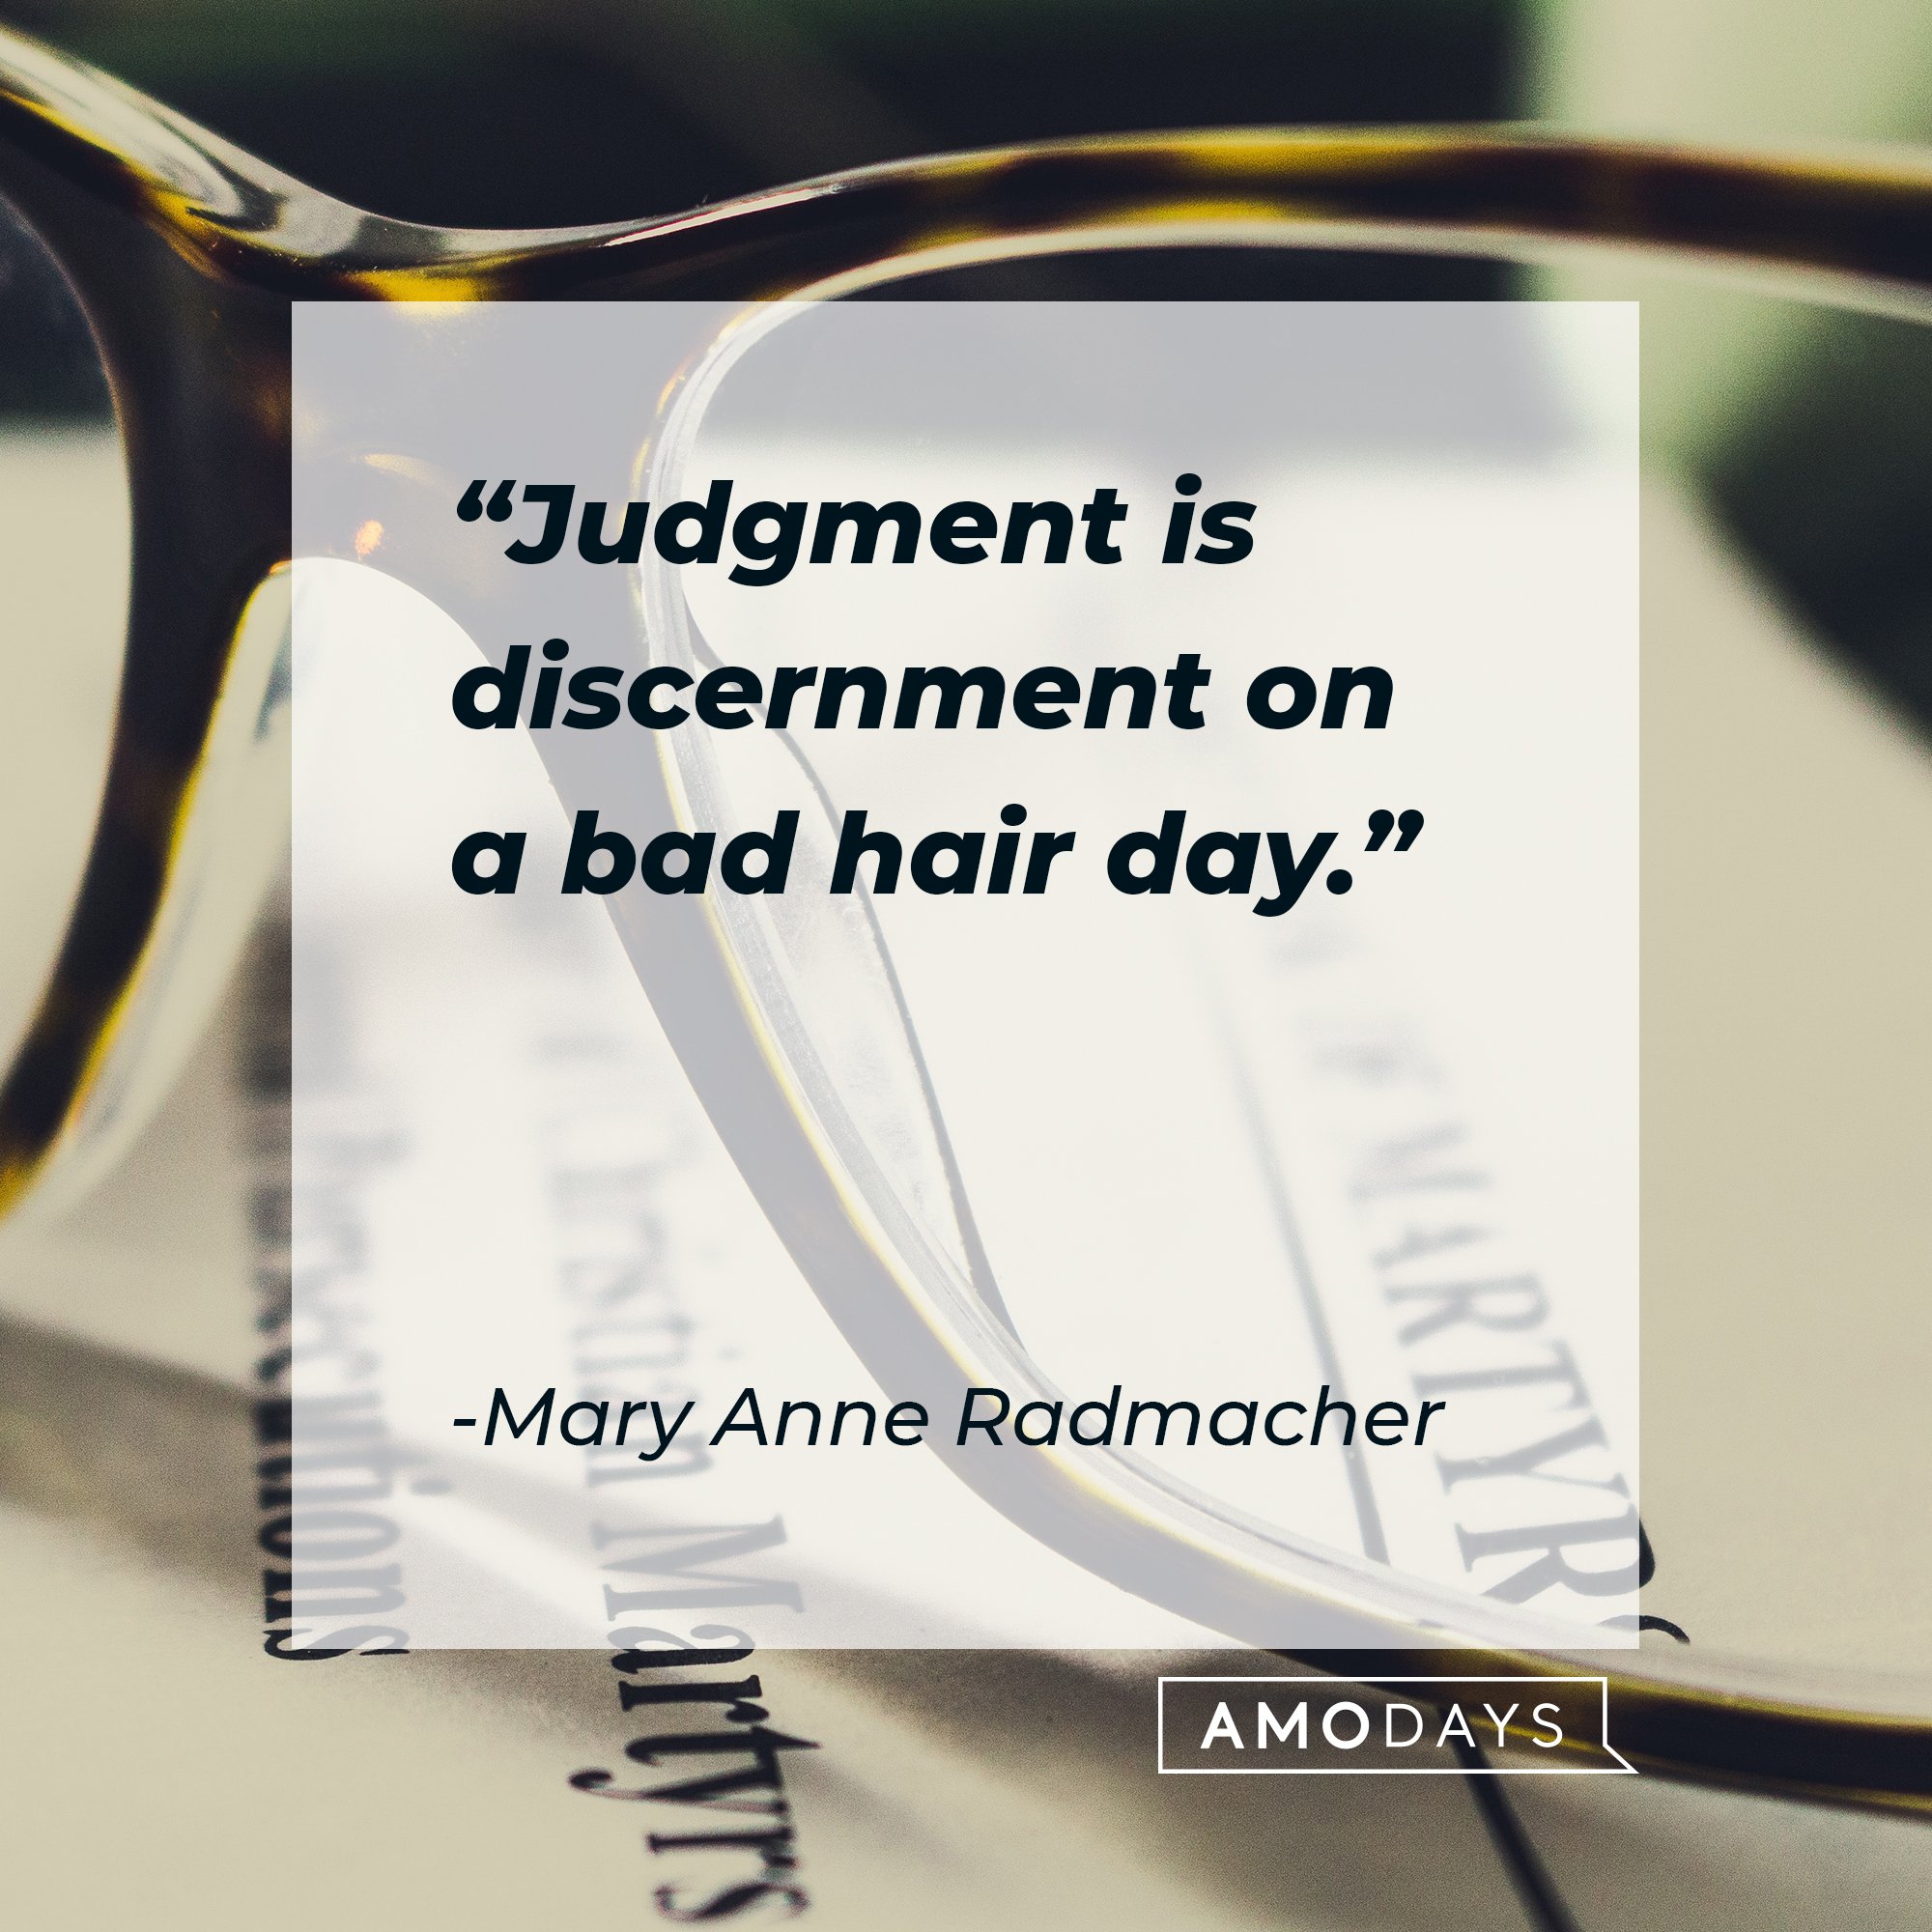 Mary Anne Radmacher's quote: "Judgment is discernment on a bad hair day." | Image: AmoDays